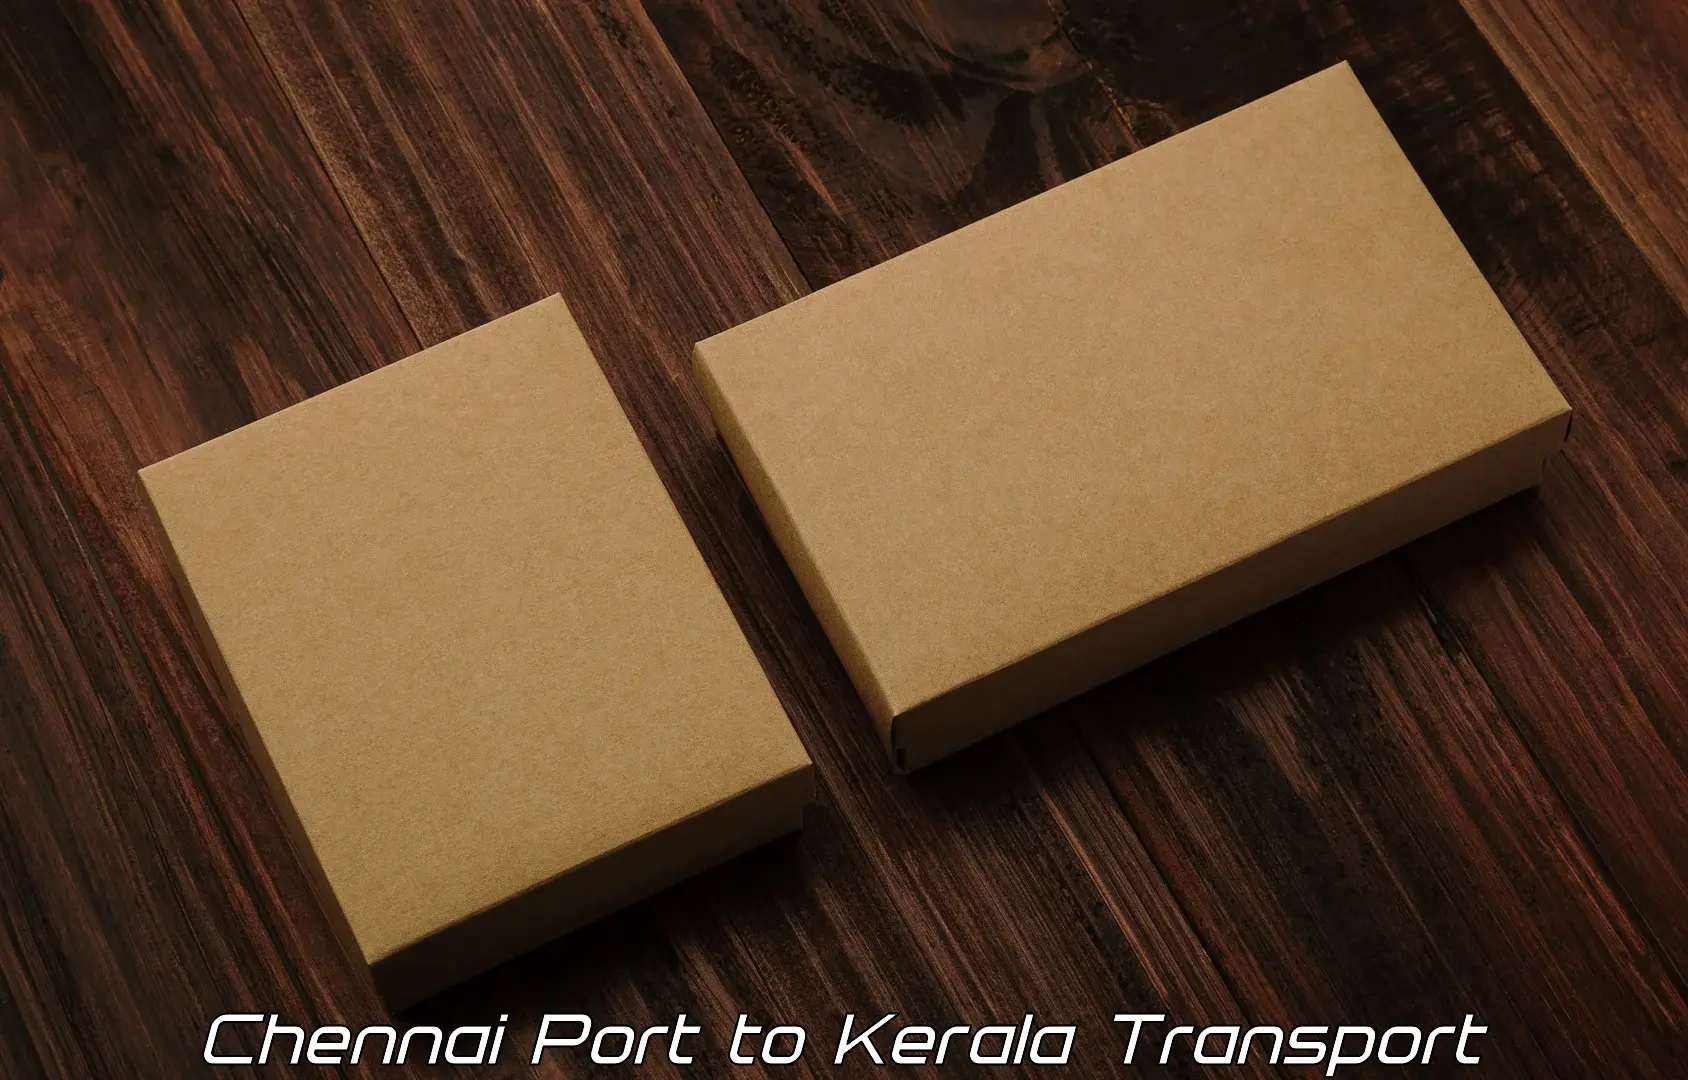 Air freight transport services Chennai Port to Kottayam